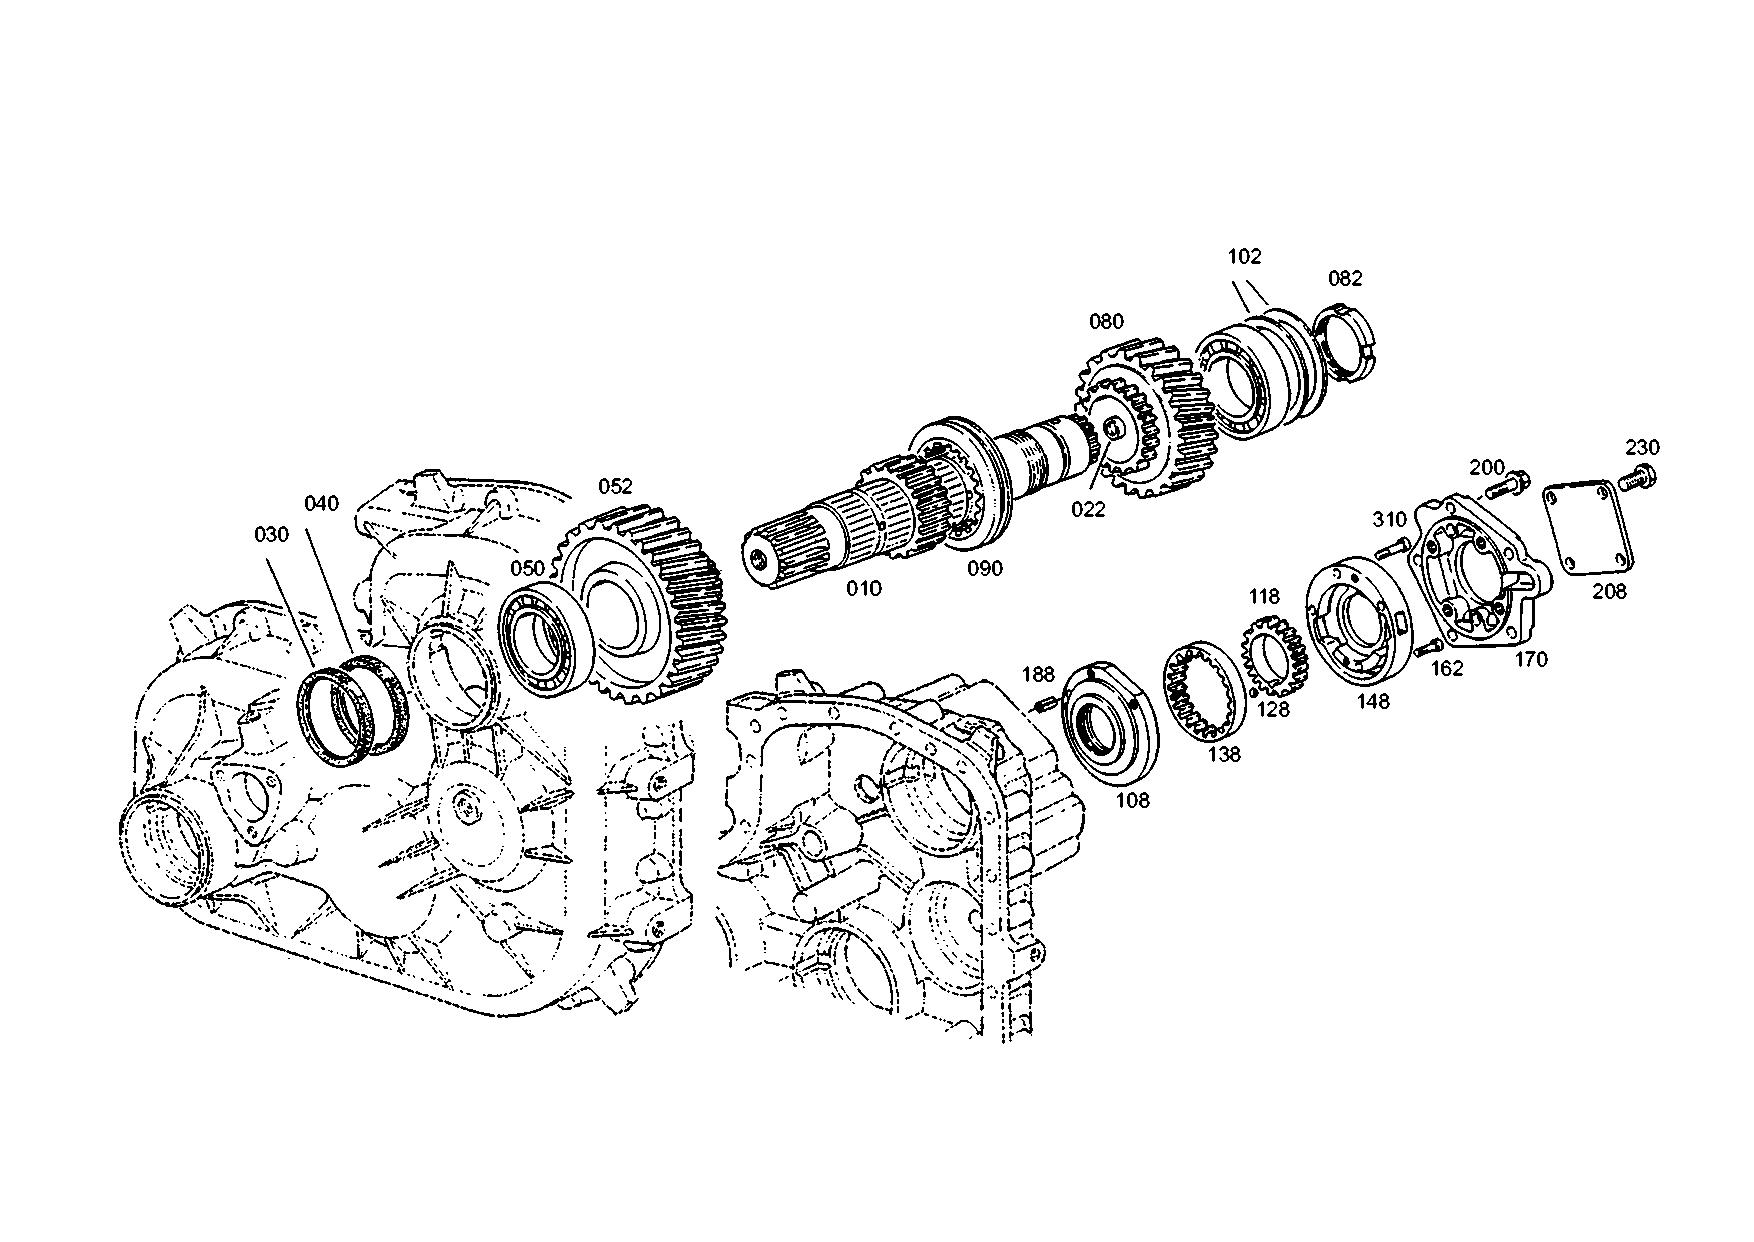 drawing for MARMON Herring MVG751055 - INPUT GEAR (figure 5)